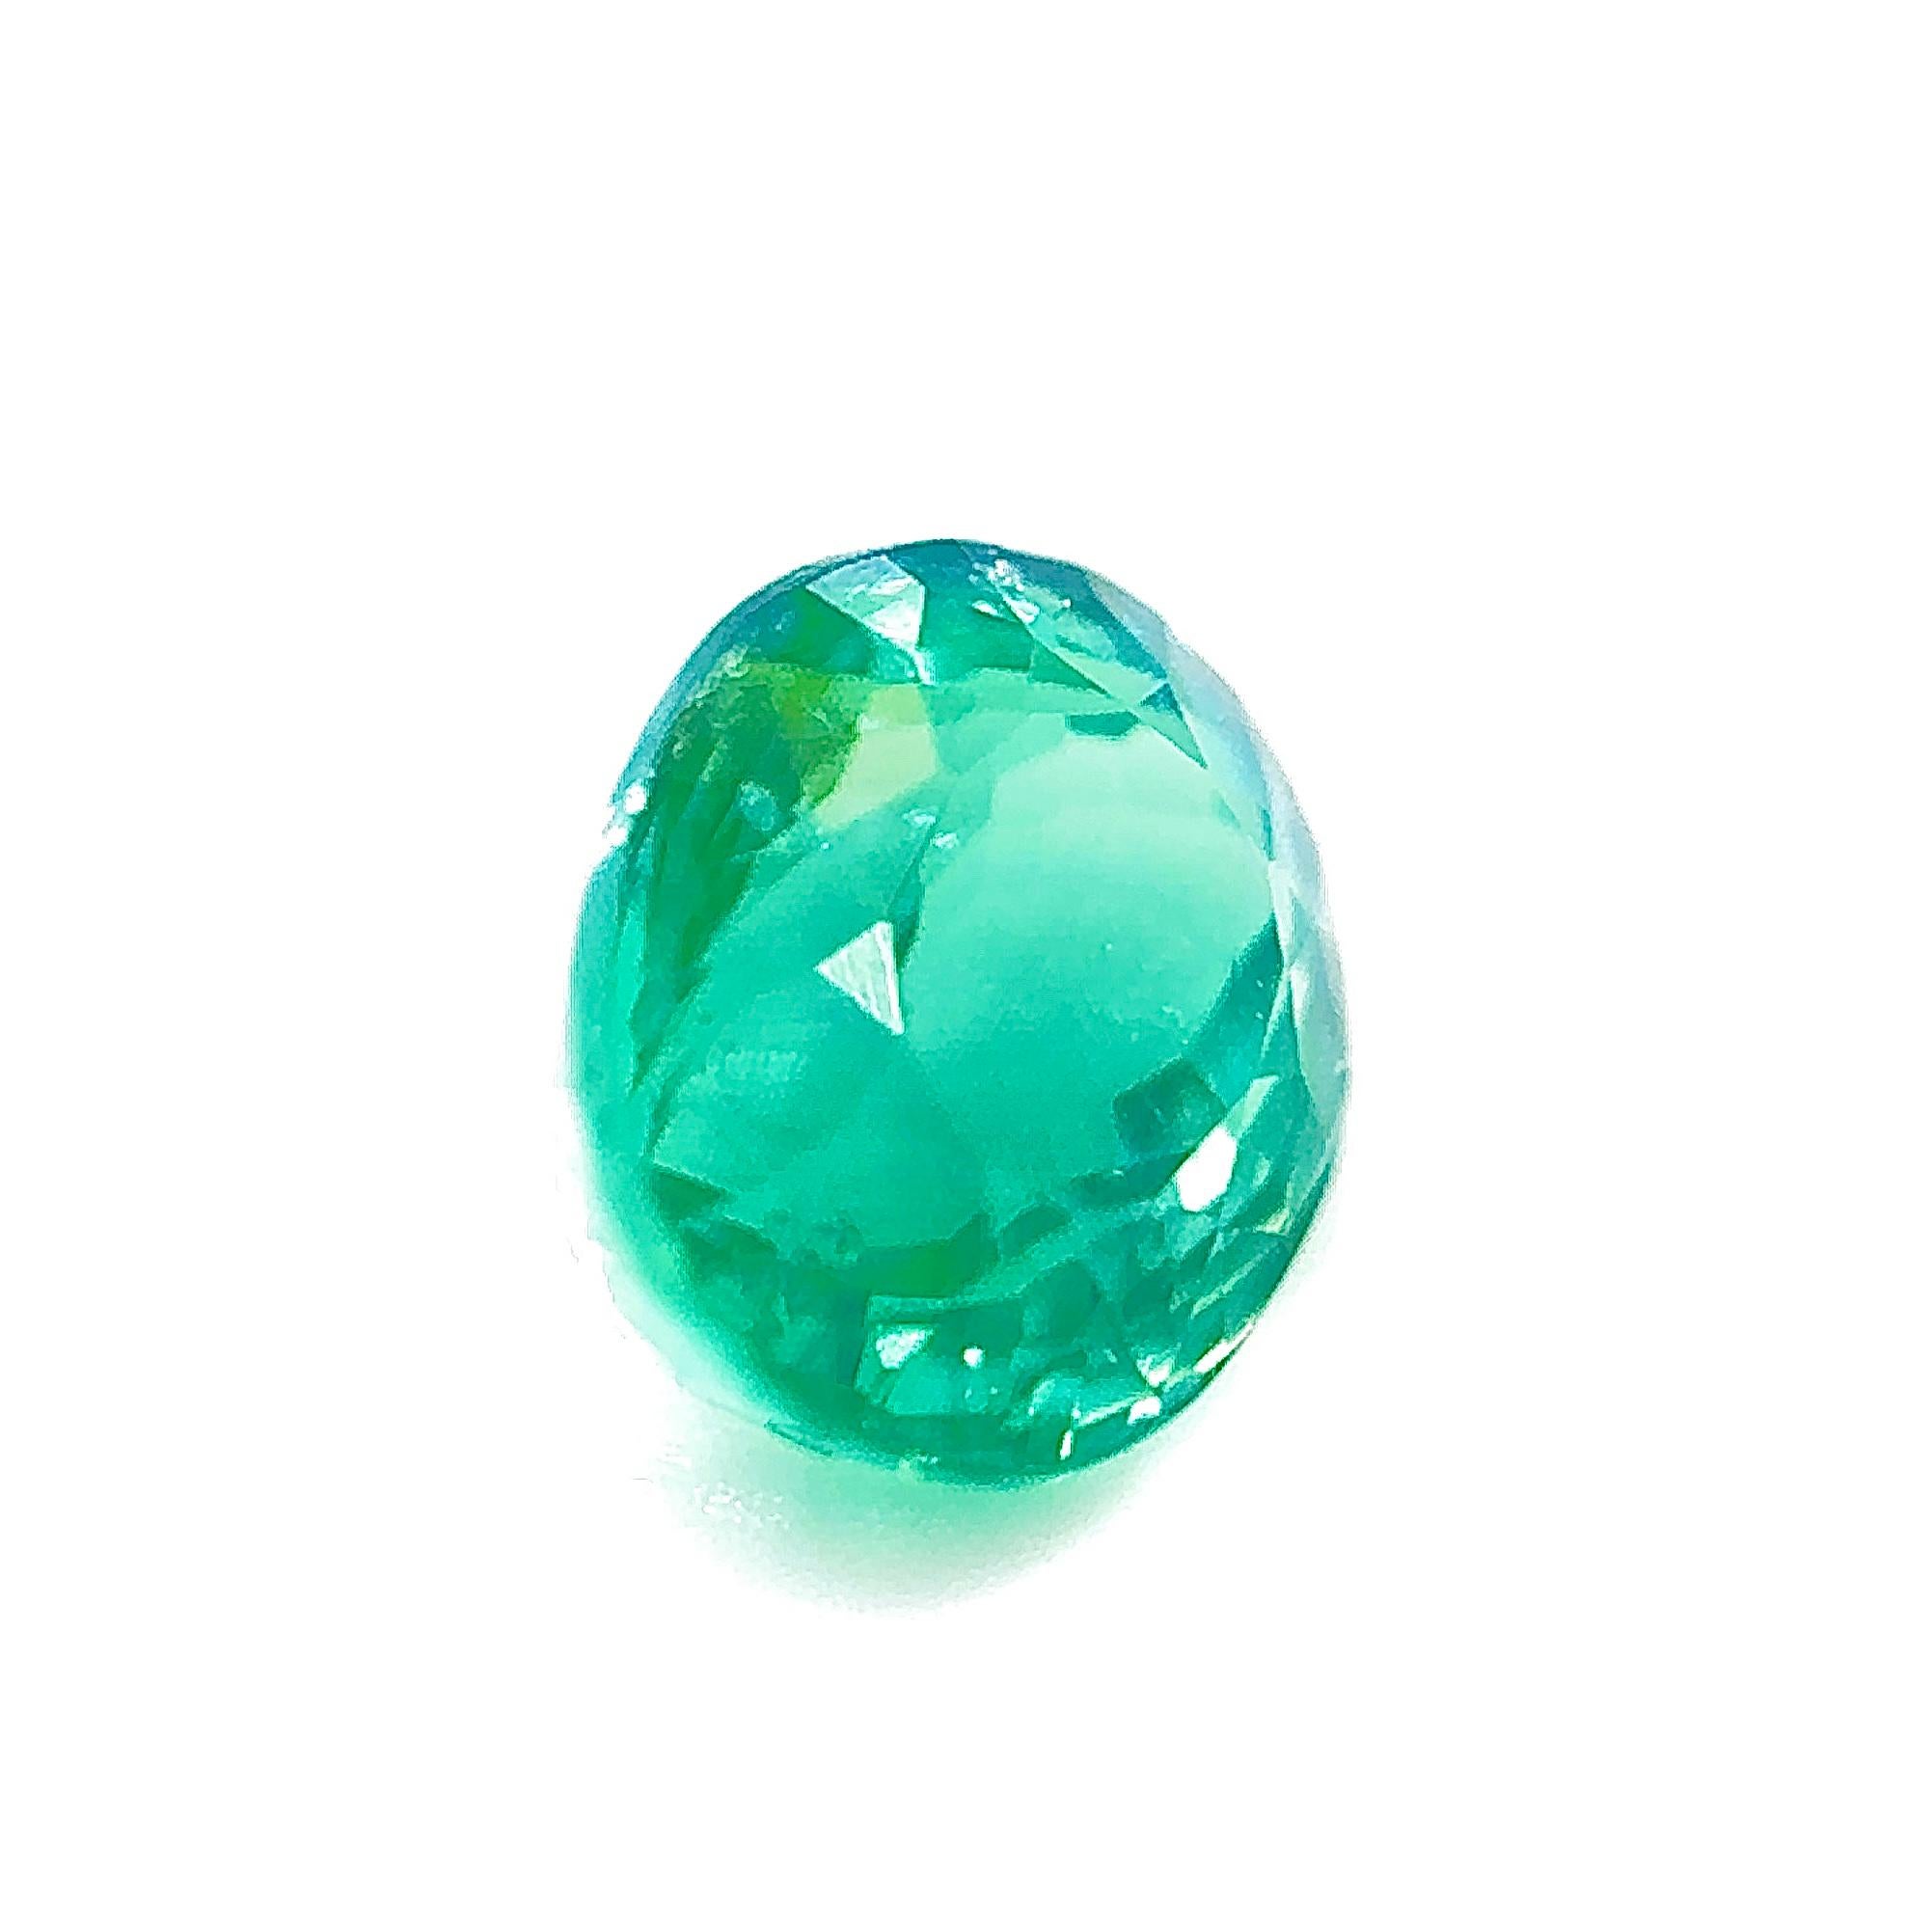 Women's or Men's 1.20 Carat Paraiba Tourmaline Loose Stone in Nylon Green and Blue  For Sale